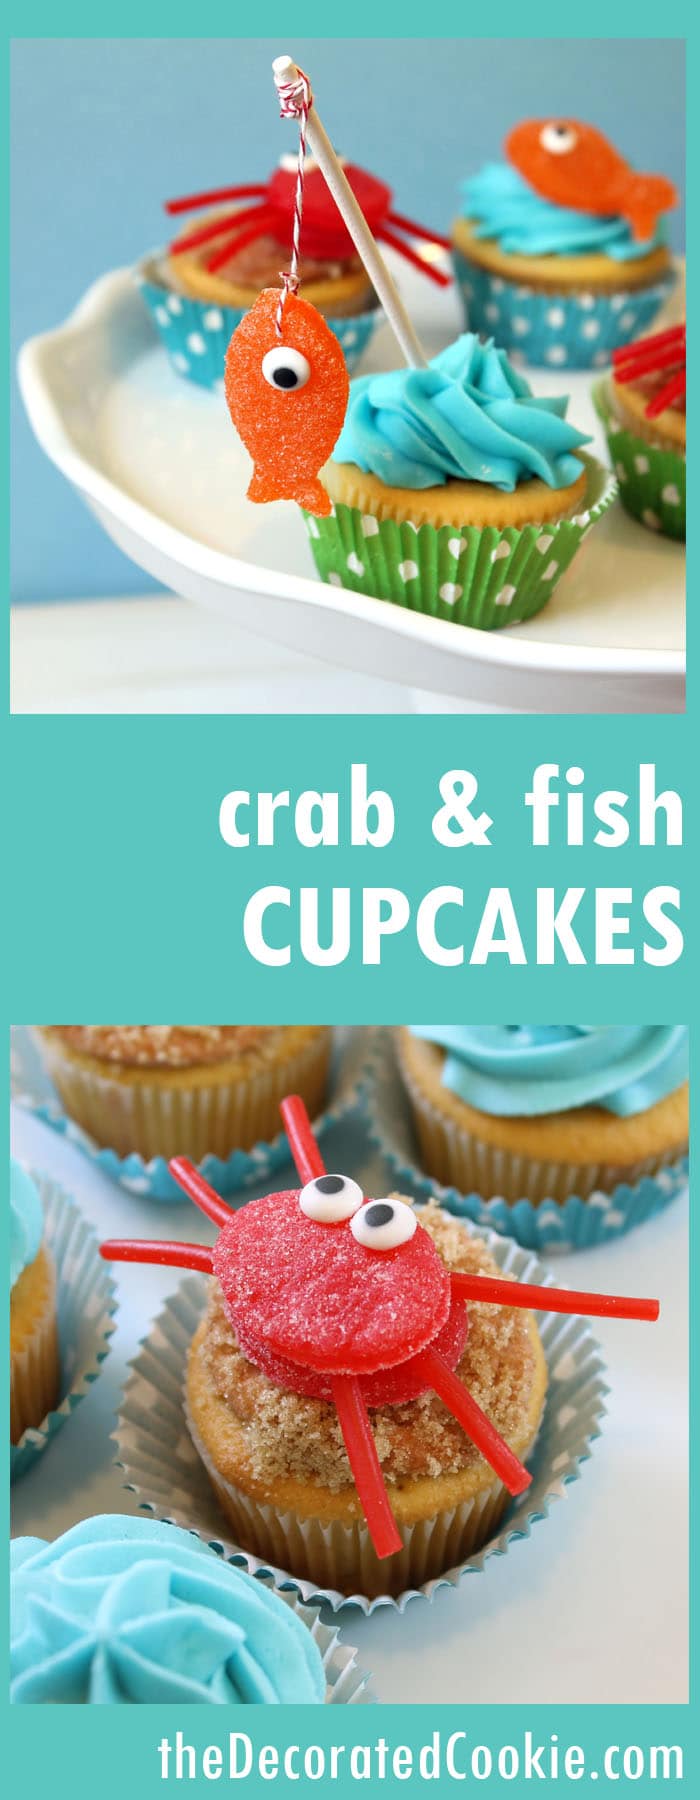 gone fishing cupcakes -- gumdrop crab and fish cupcakes 